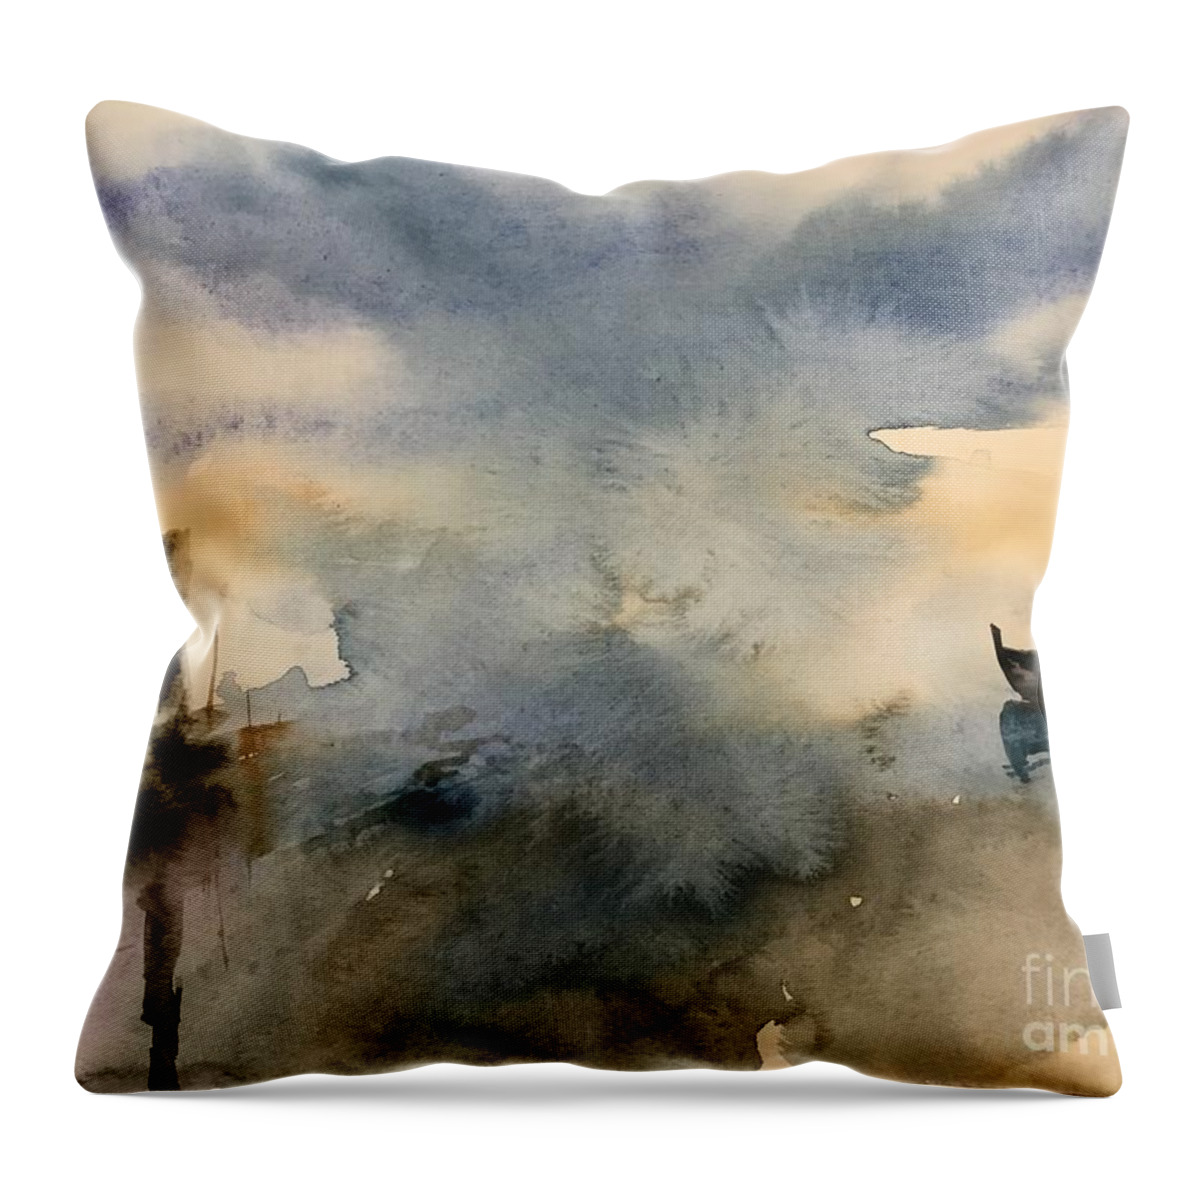 1902019 Throw Pillow featuring the painting 1902019 by Han in Huang wong